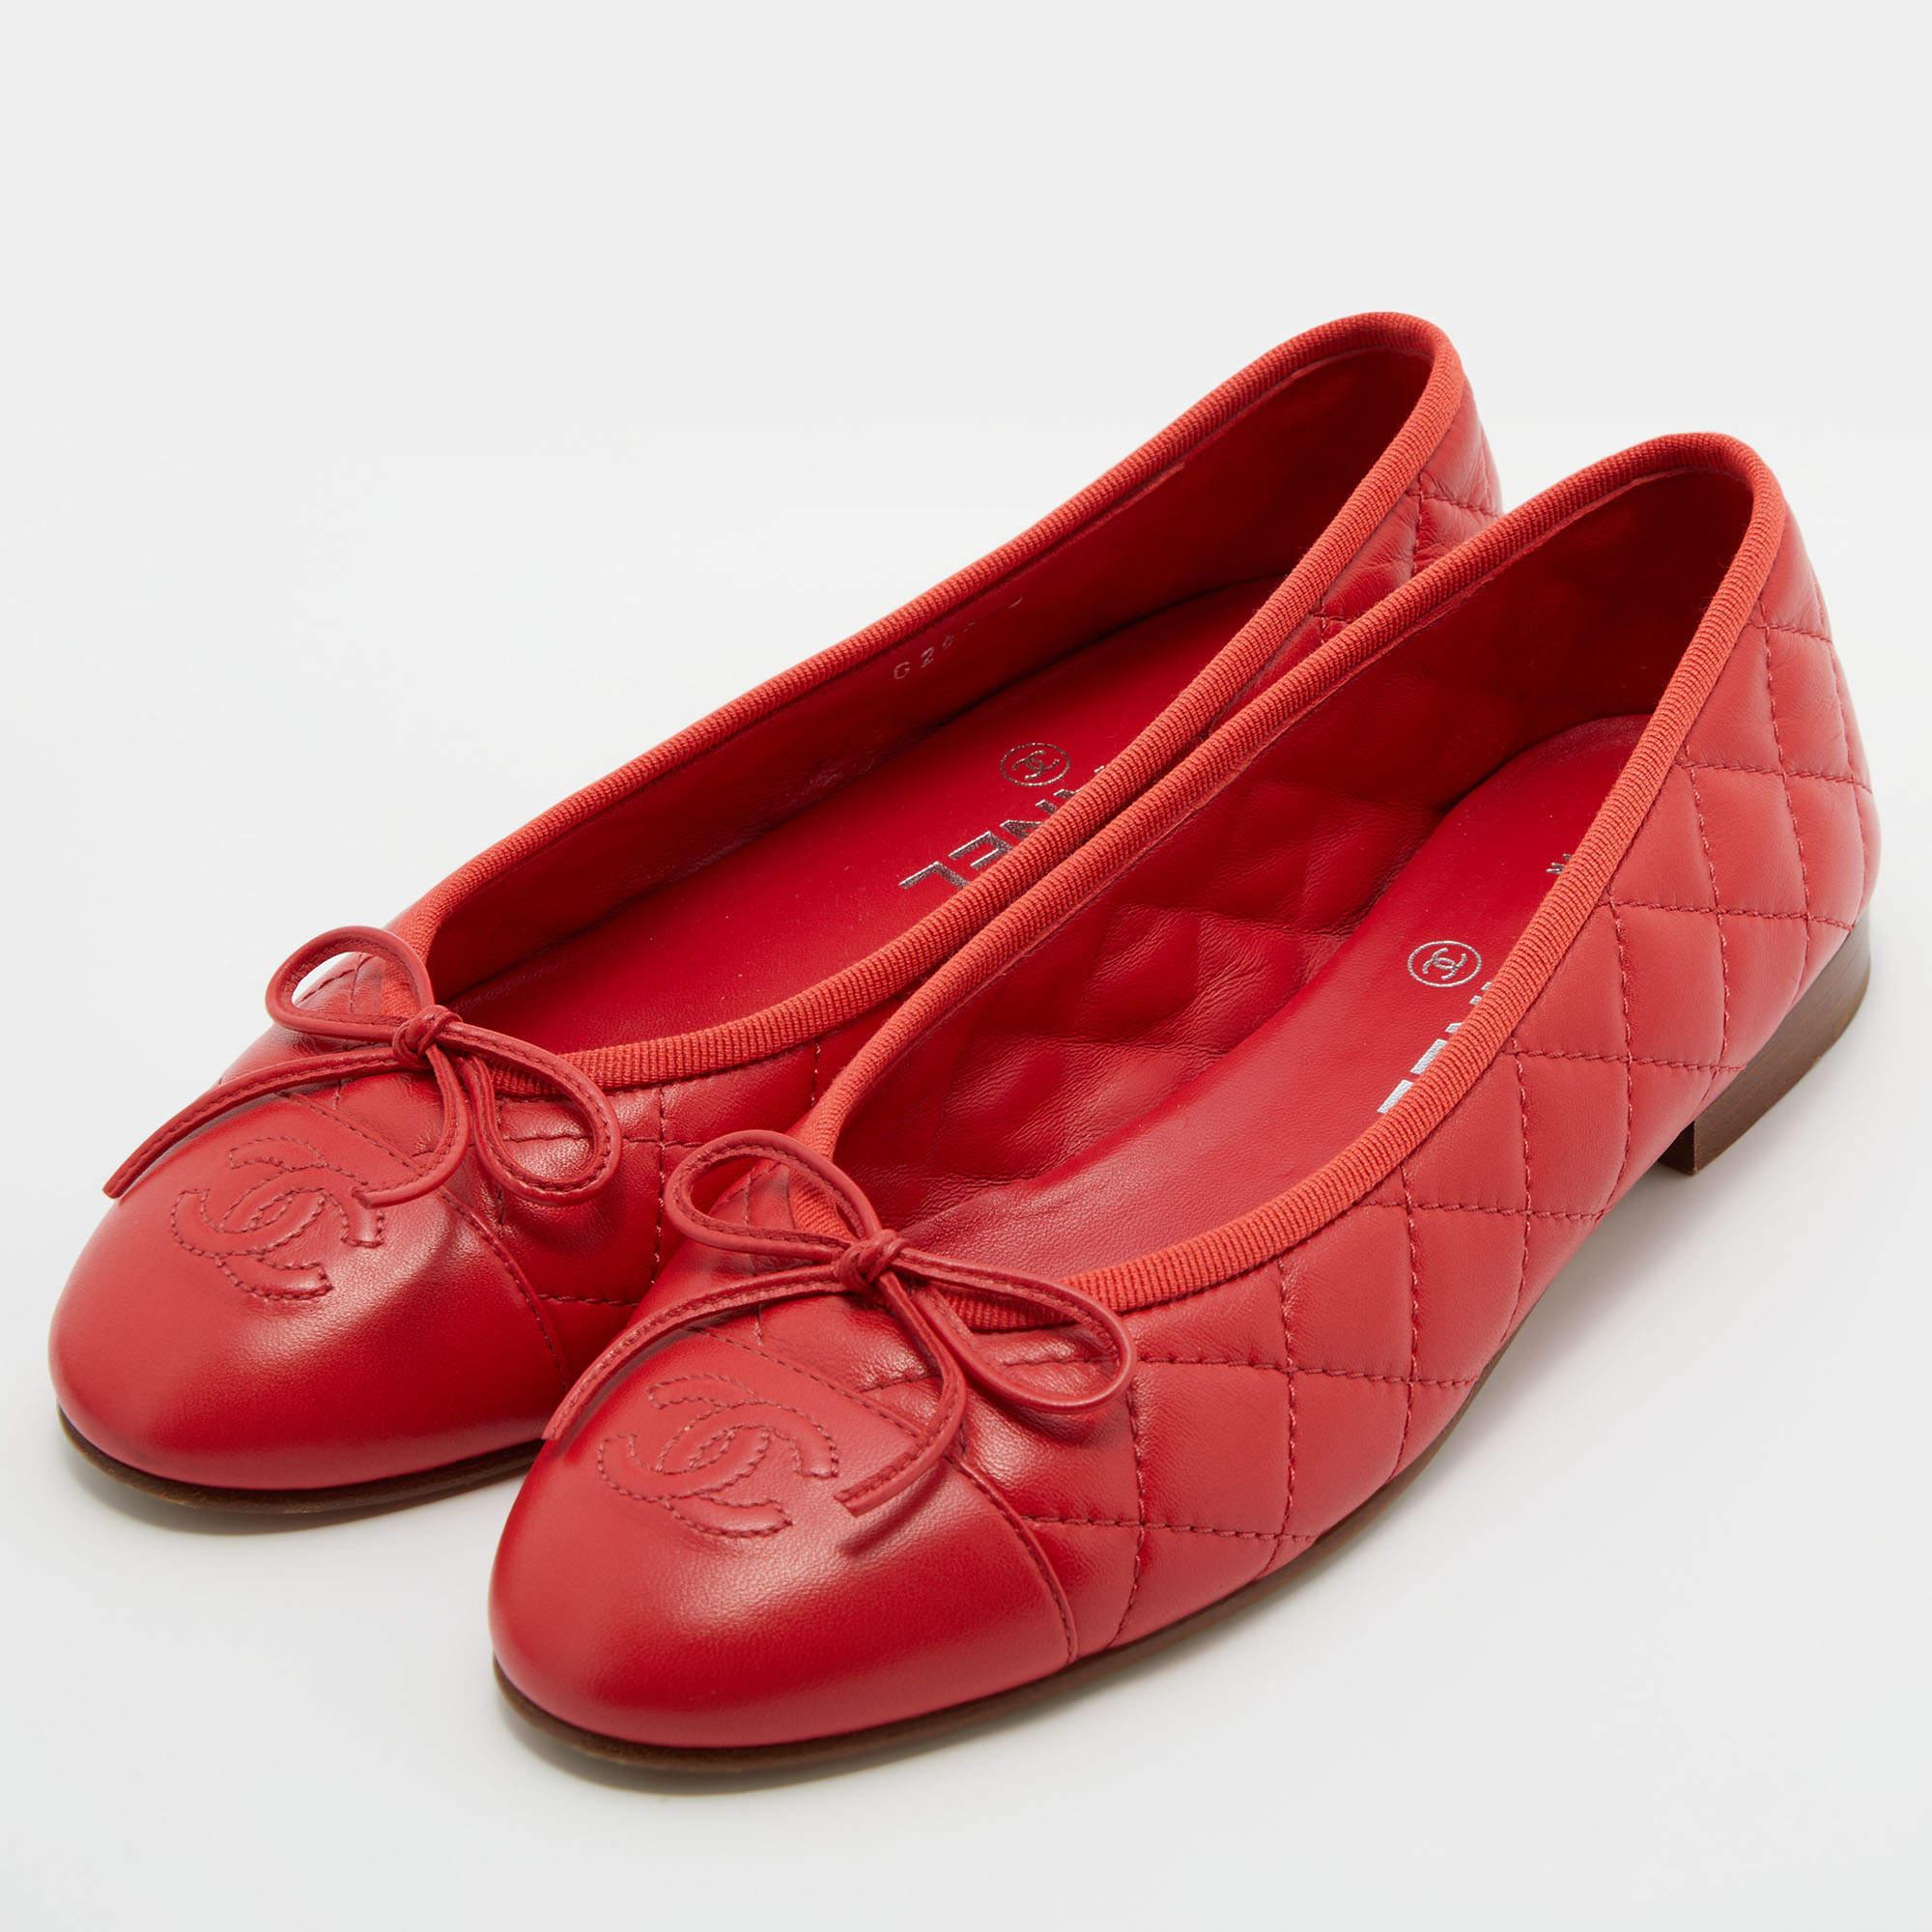 Women's or Men's Chanel Red Quilted Leather CC Bow Cap Toe Ballet Flats Size 37